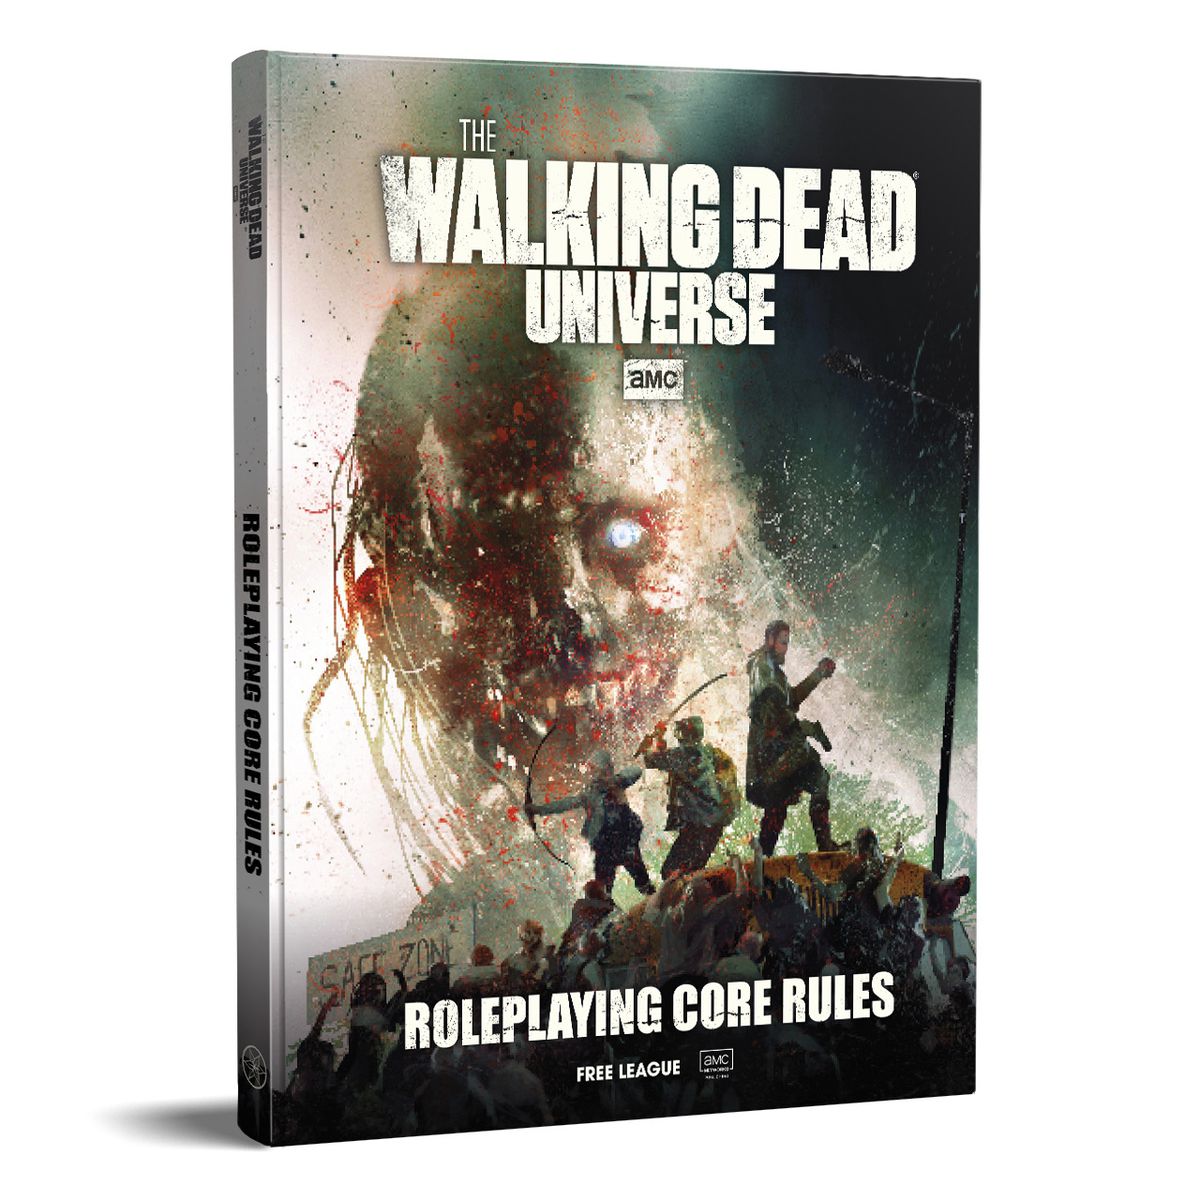 A mockup of the book itself, featuring survivors making a last stand on top of a school bus. The title reads The Walking Dead Universe Roleplaying Core Rules.